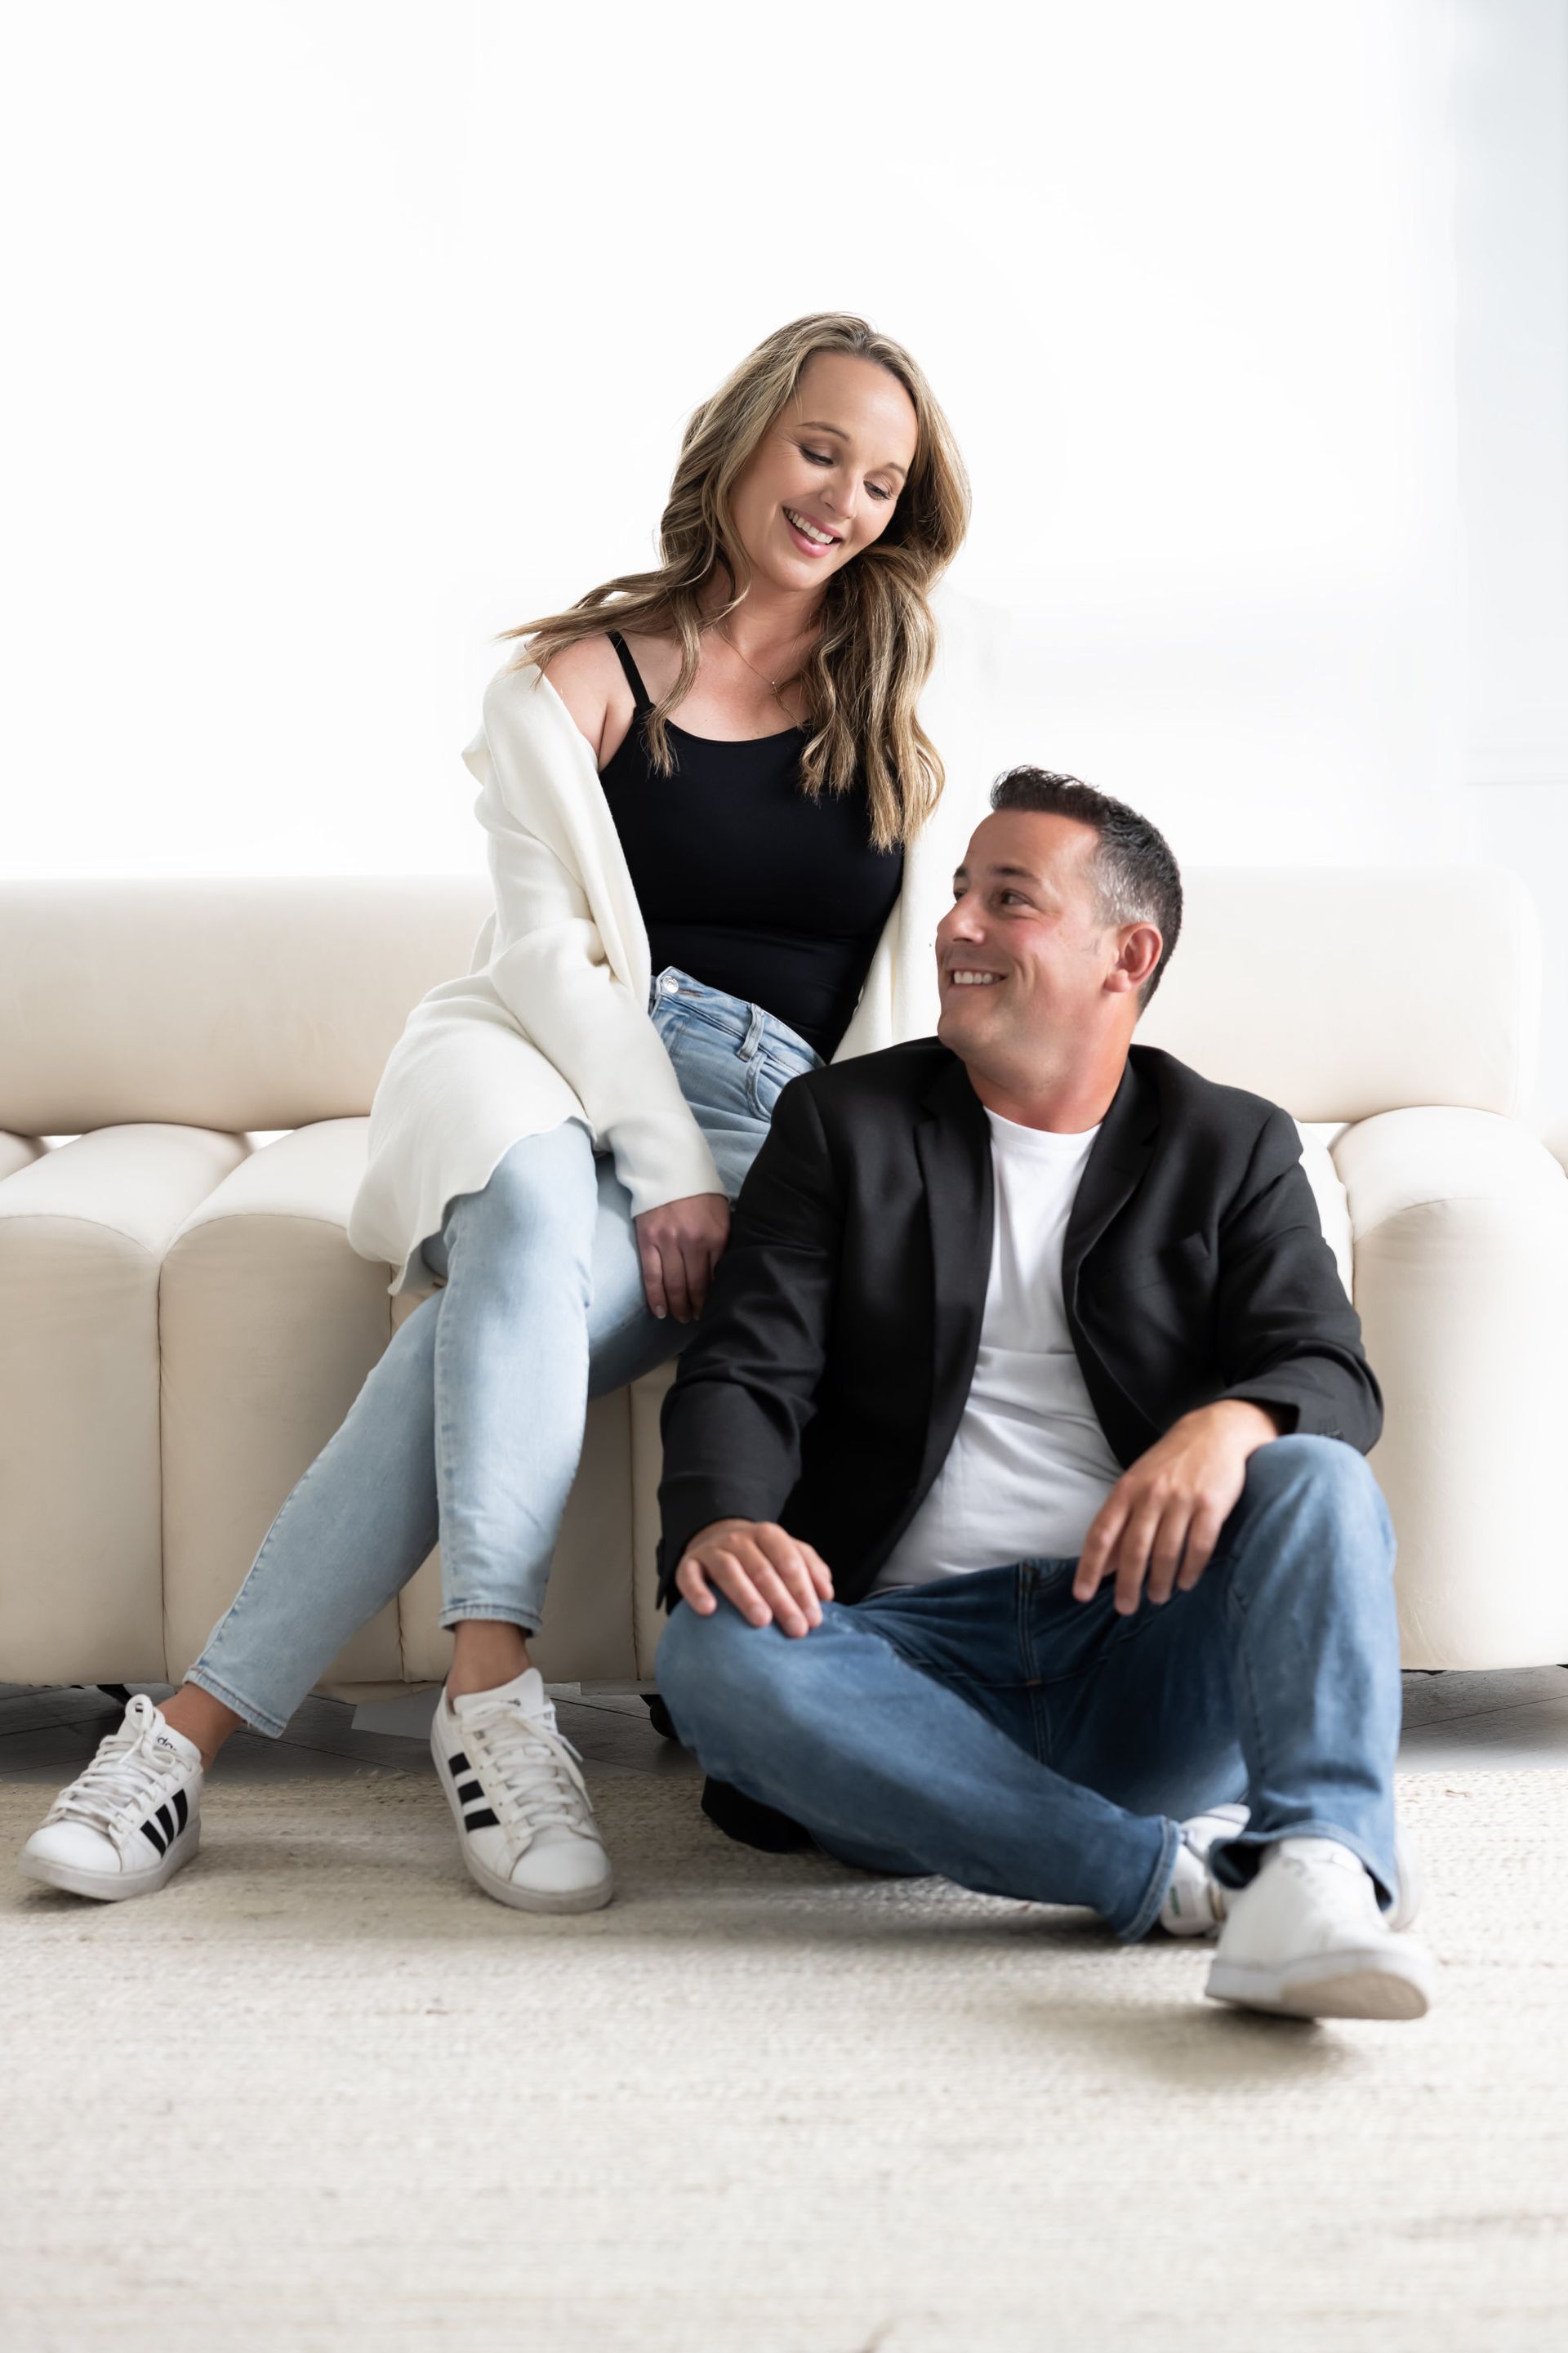 An informal and cozy portrait of a smiling couple seated on a white couch, conveying a relaxed yet professional ambiance.